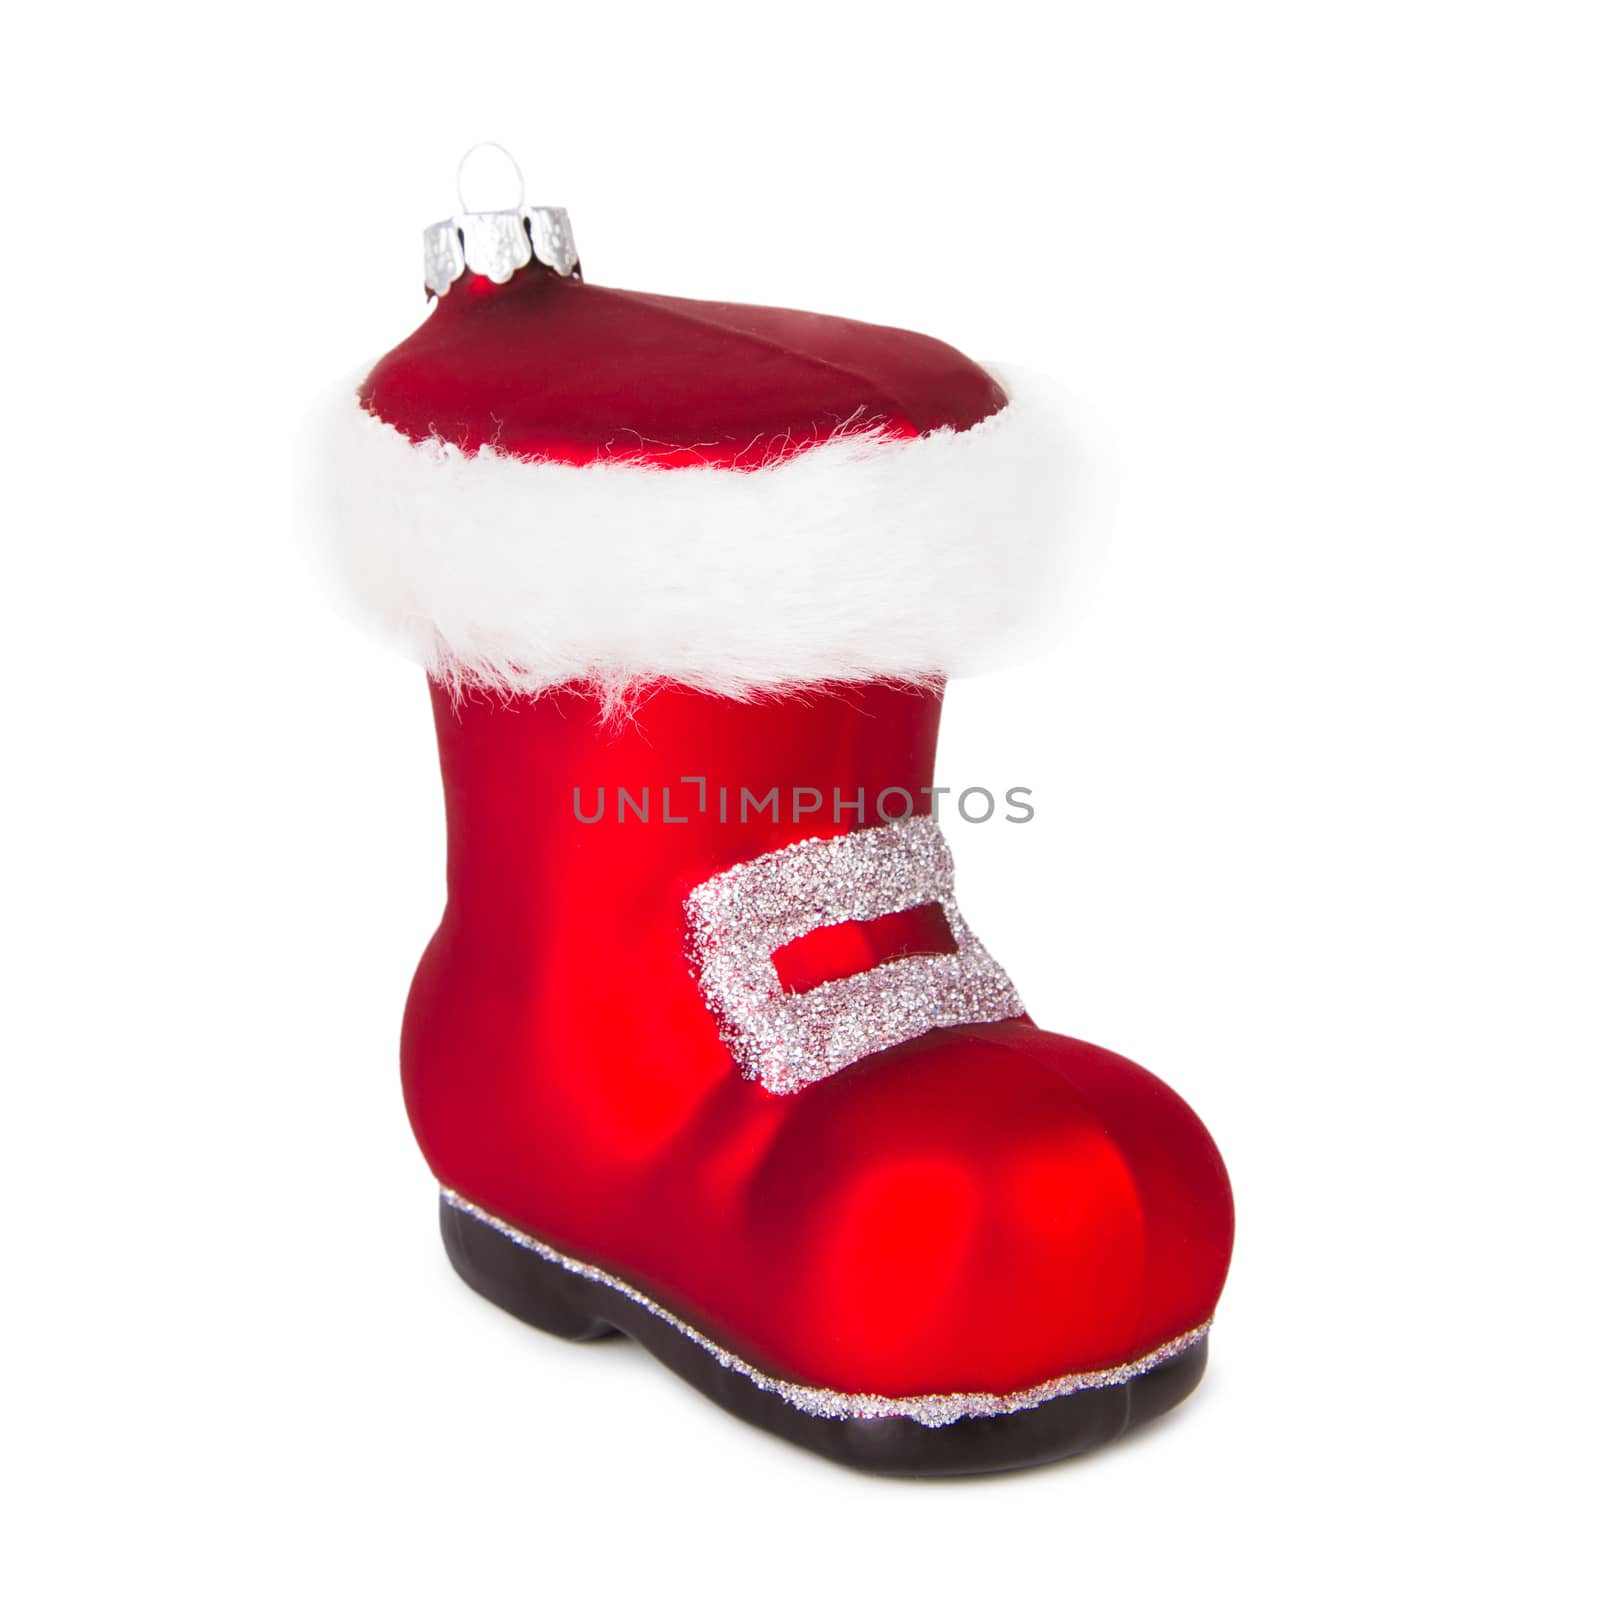 Red Christmas decoration - the boot of Santa Claus, isolated on white background